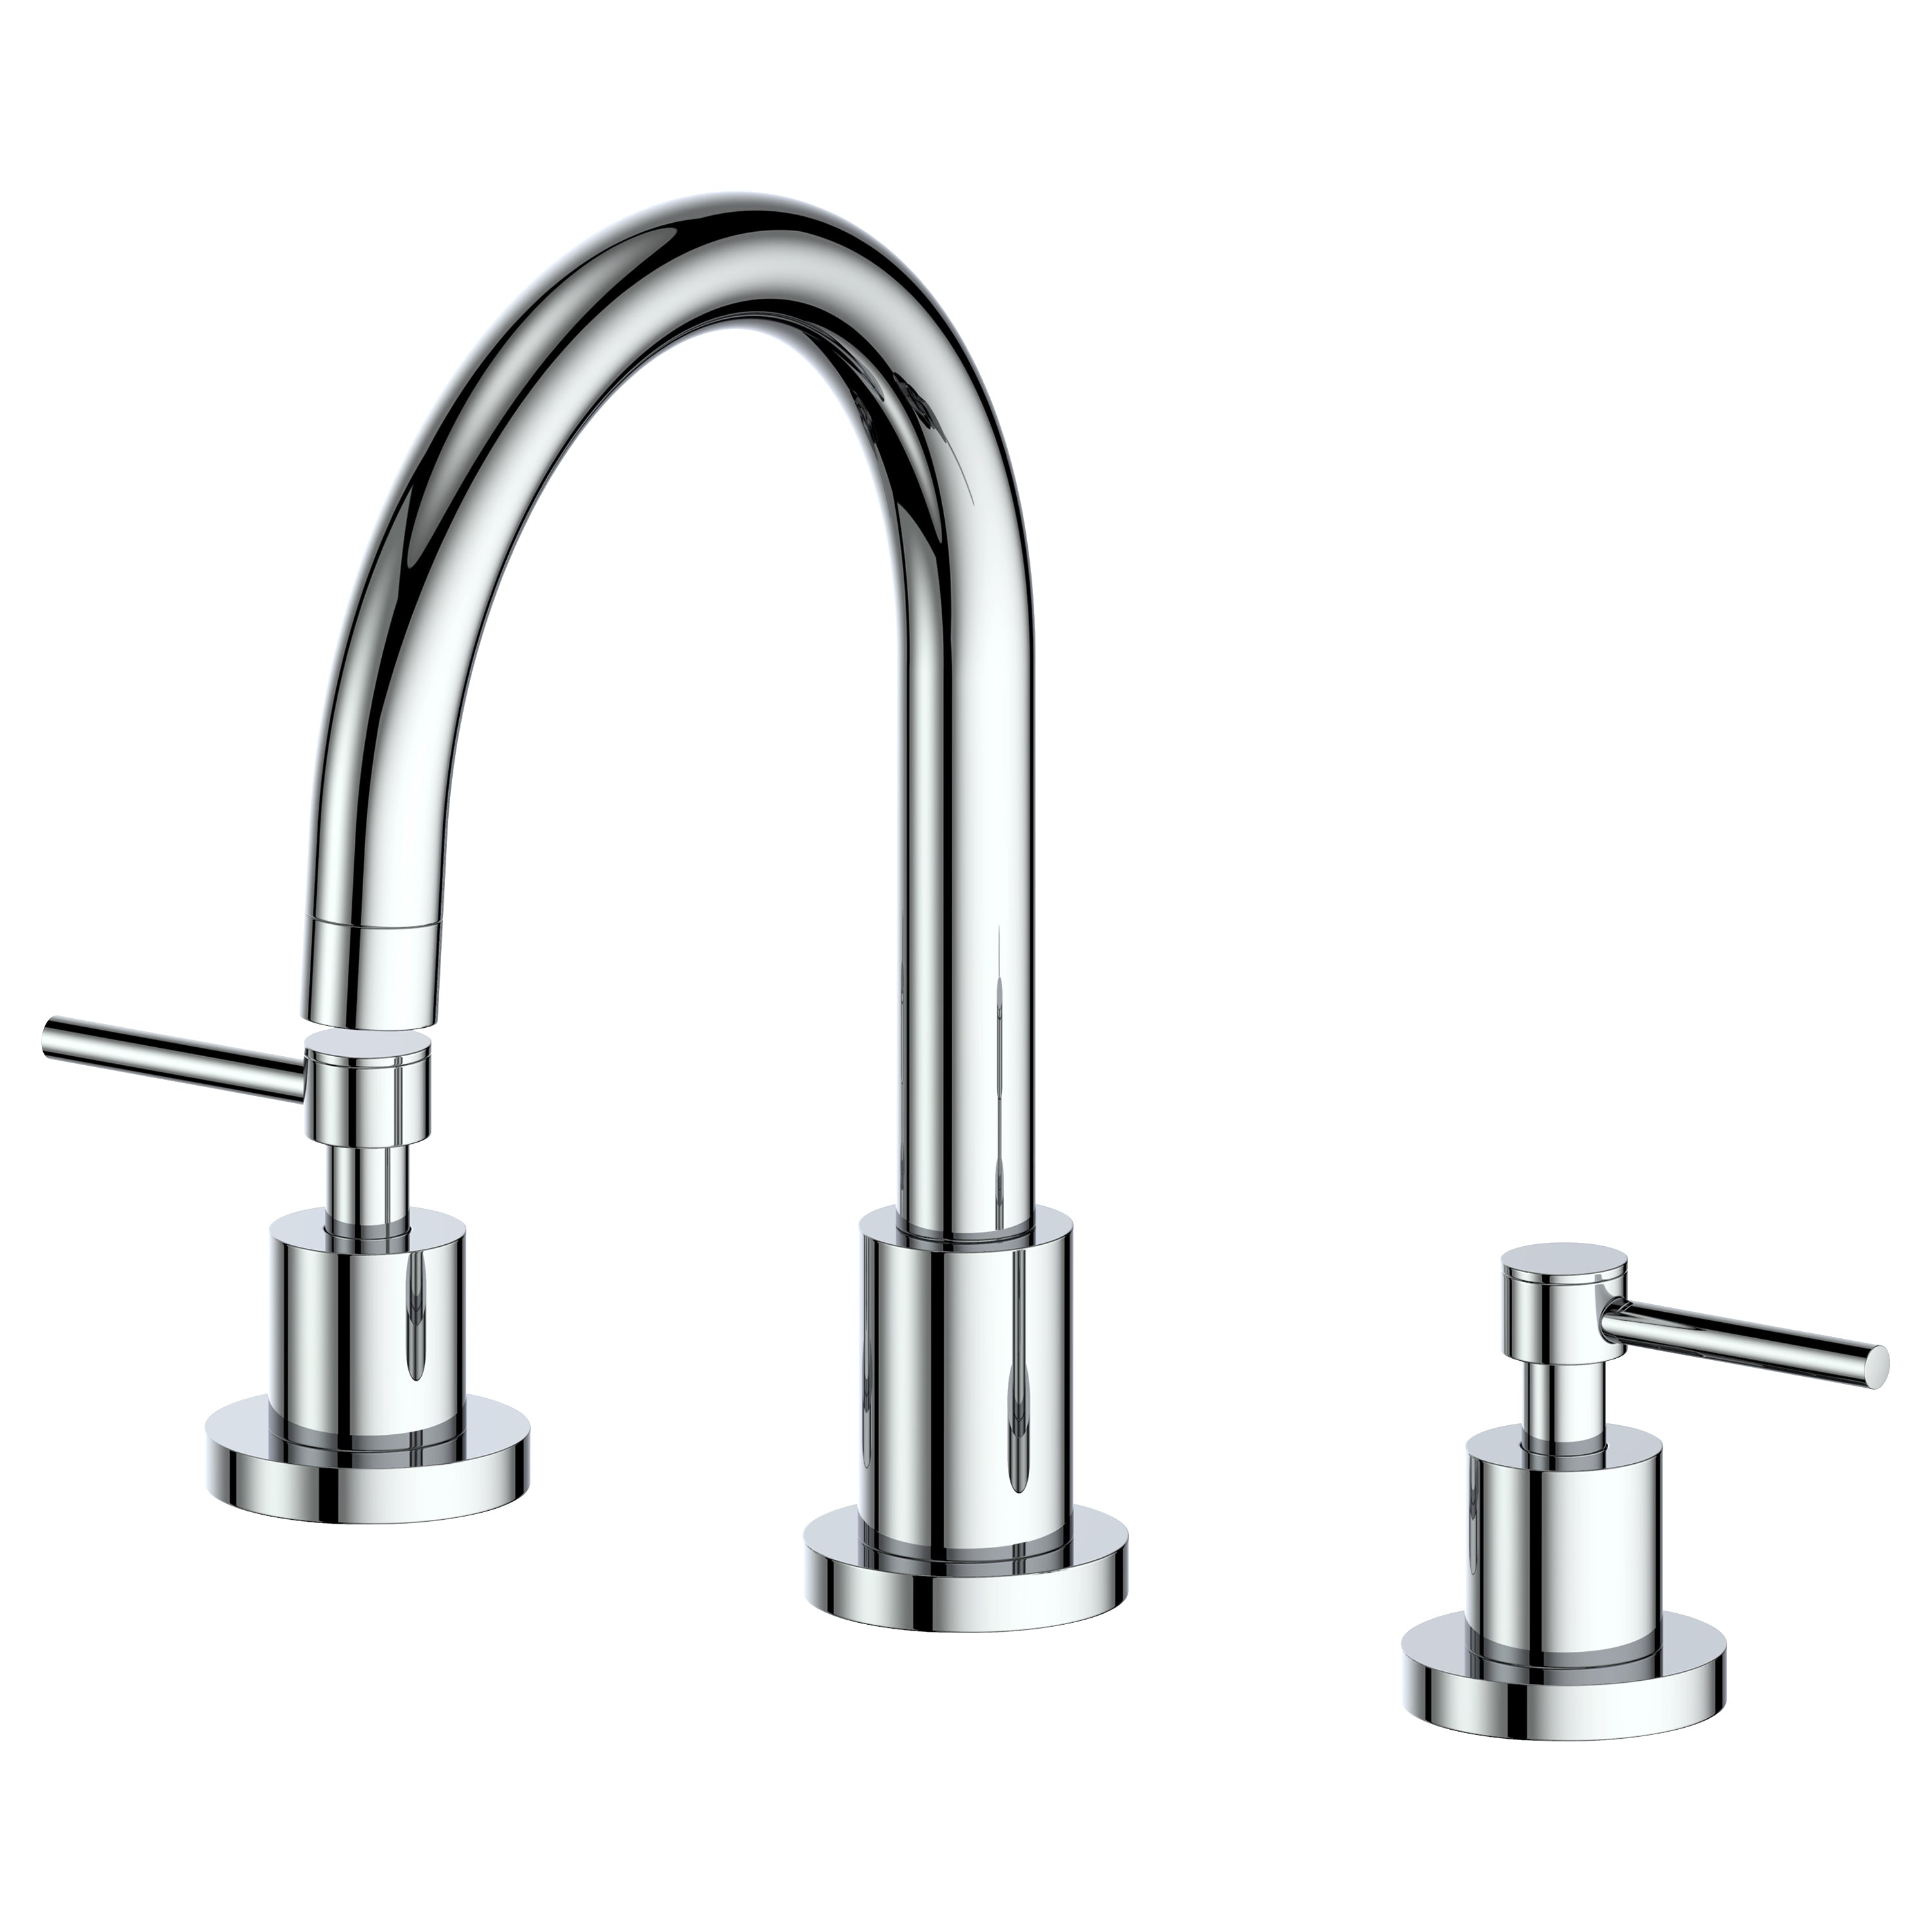 ZLINE Emerald Bay Bath Faucet in Chrome (EMBY-BF-CH)